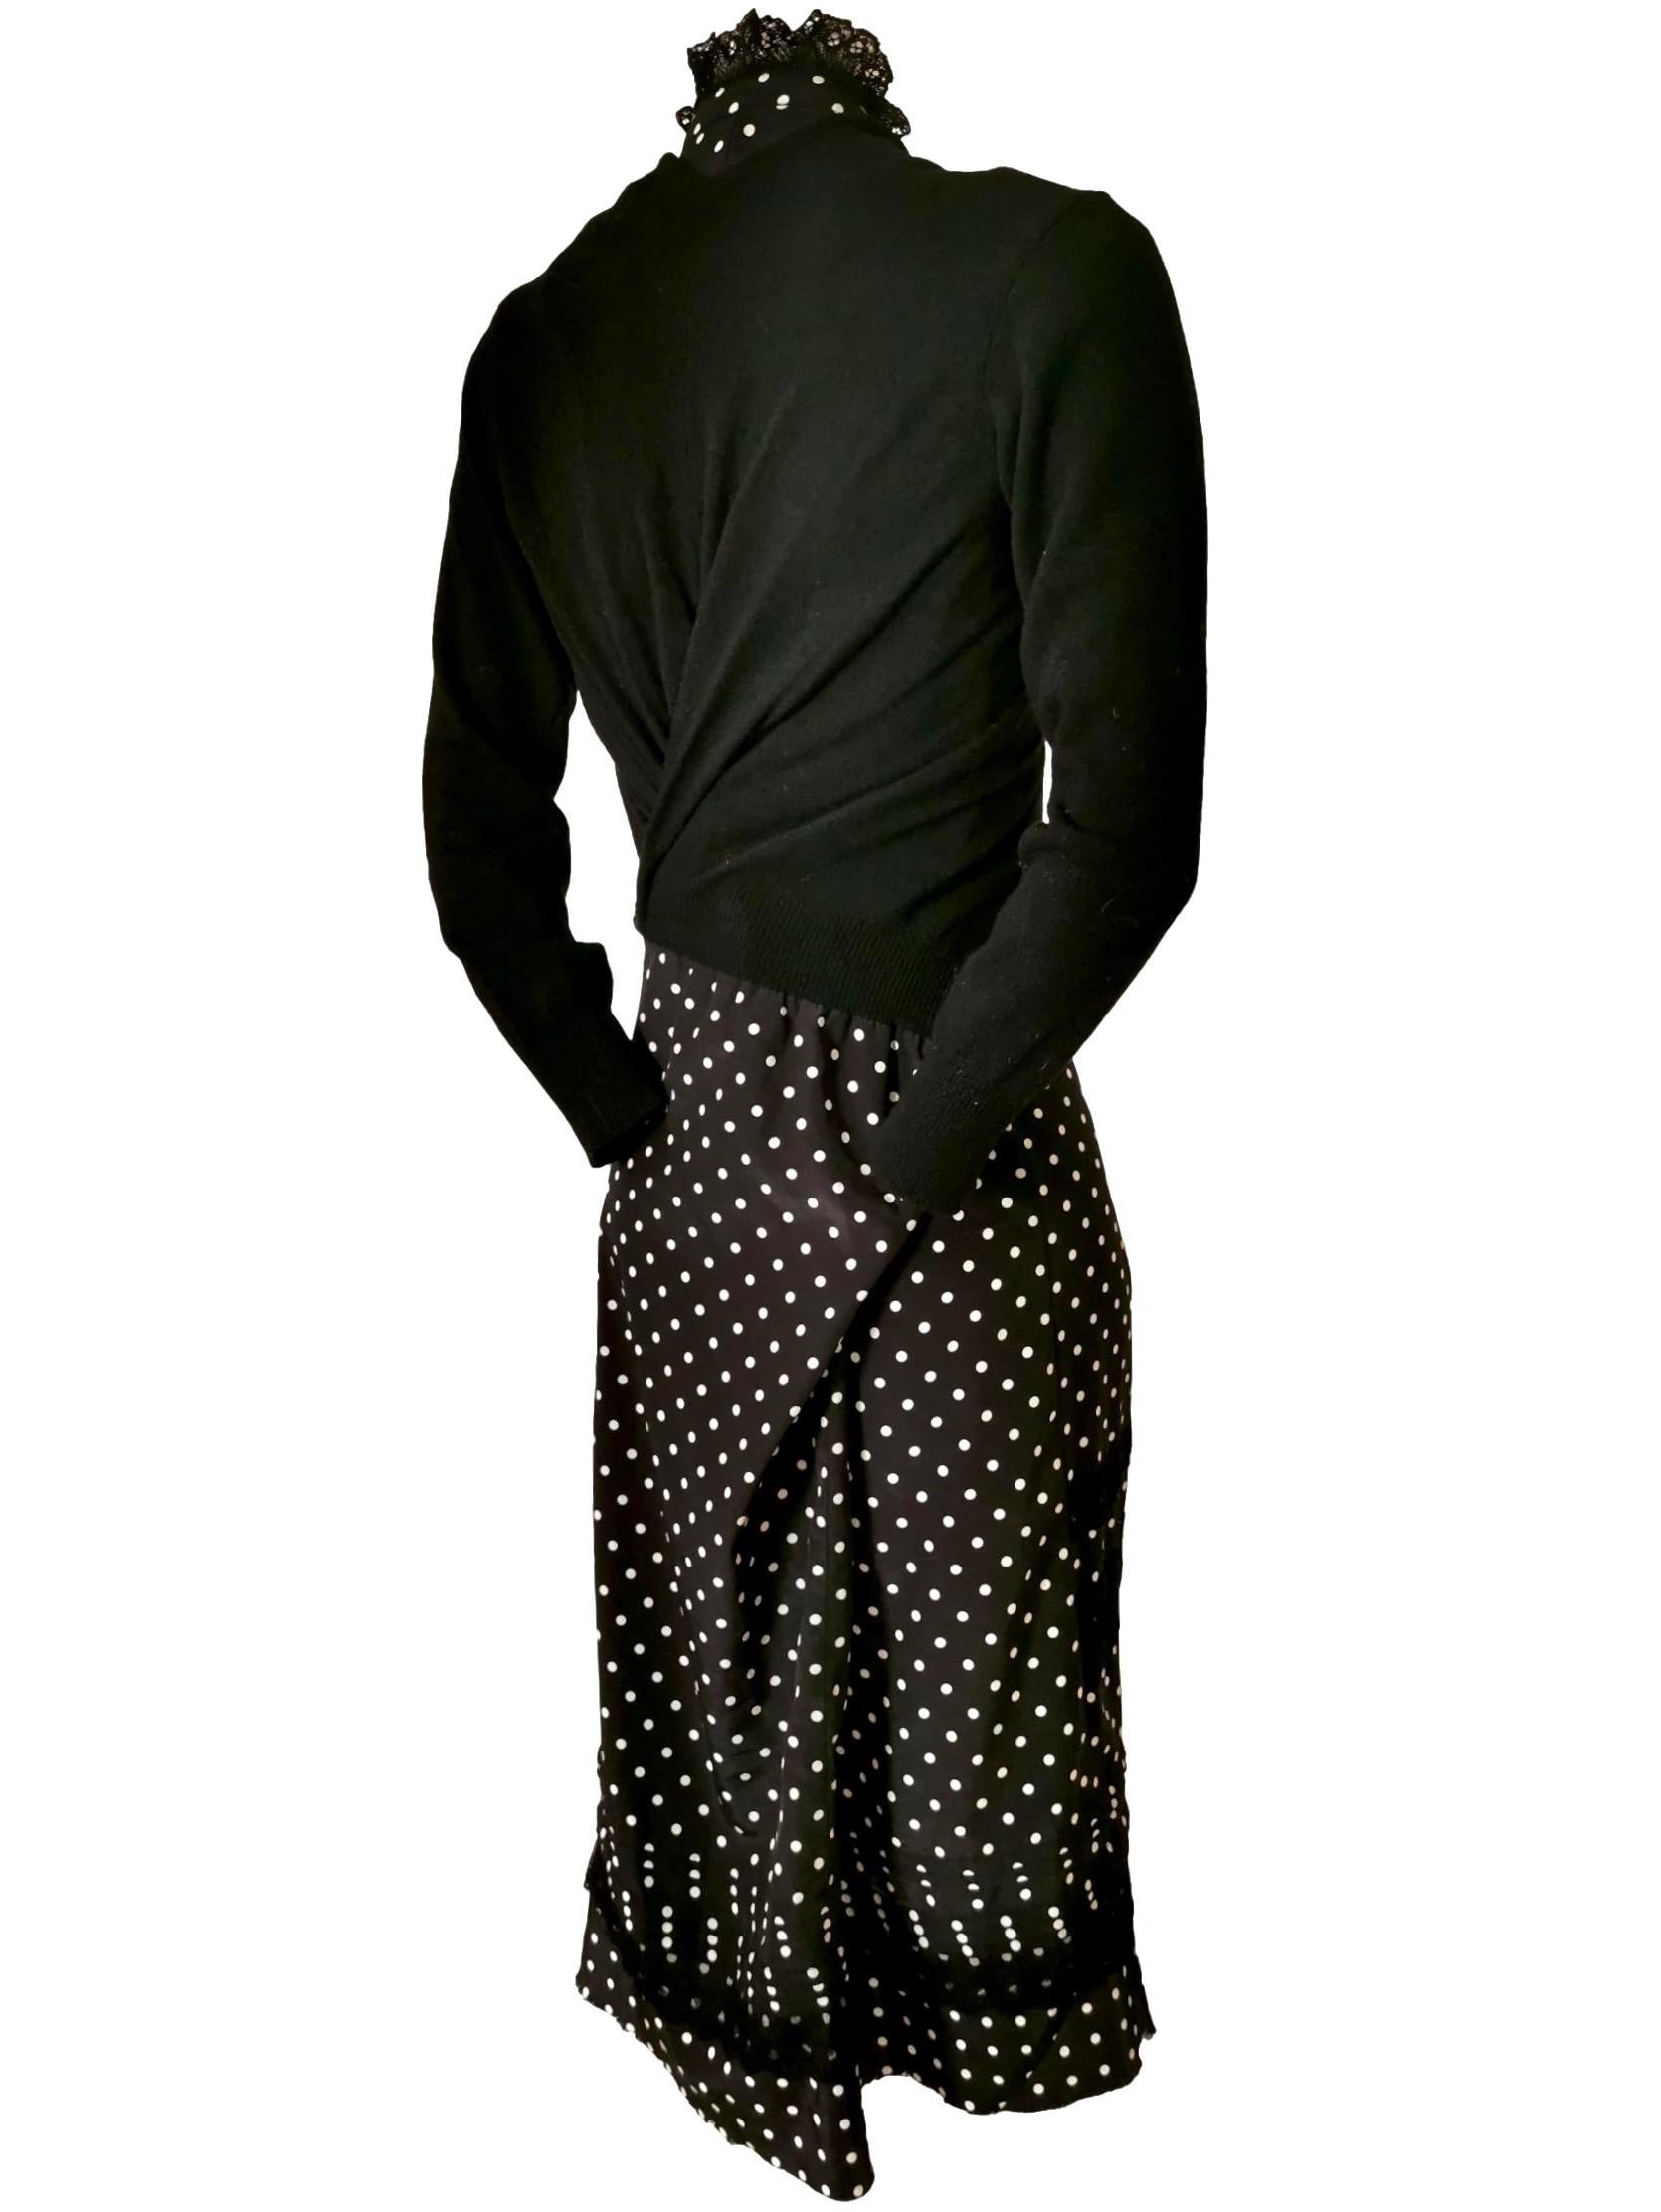 Junya Watanabe Comme des Garcons Twisted Polka Dot Cardigan Dress AD 2007 For Sale 3